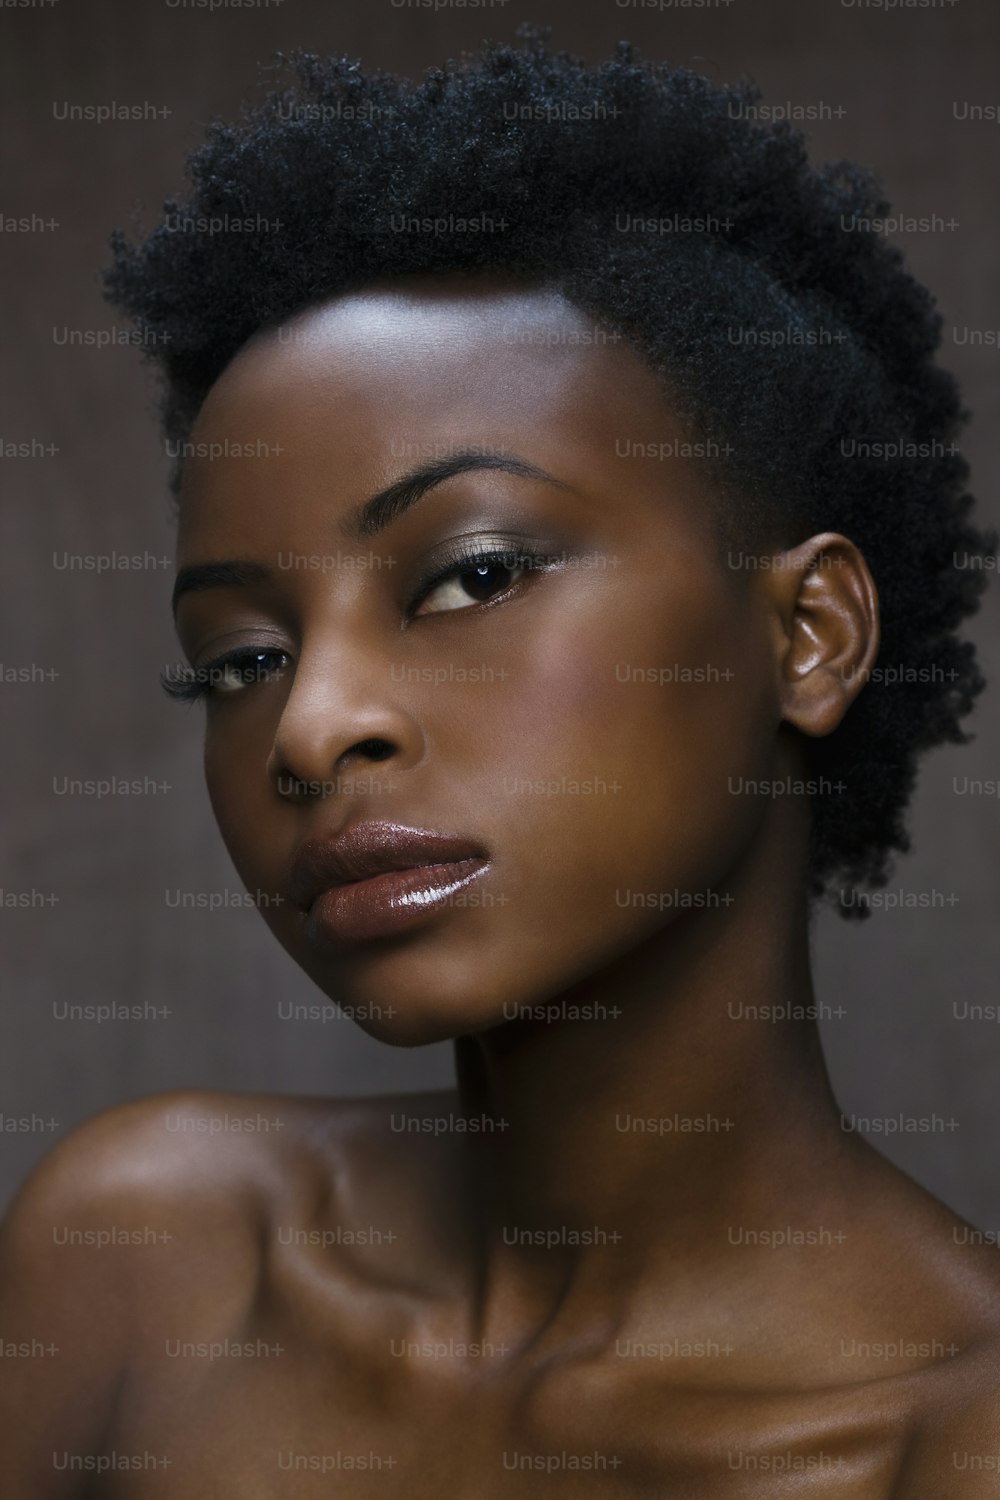 Afro-American woman with flawless skin